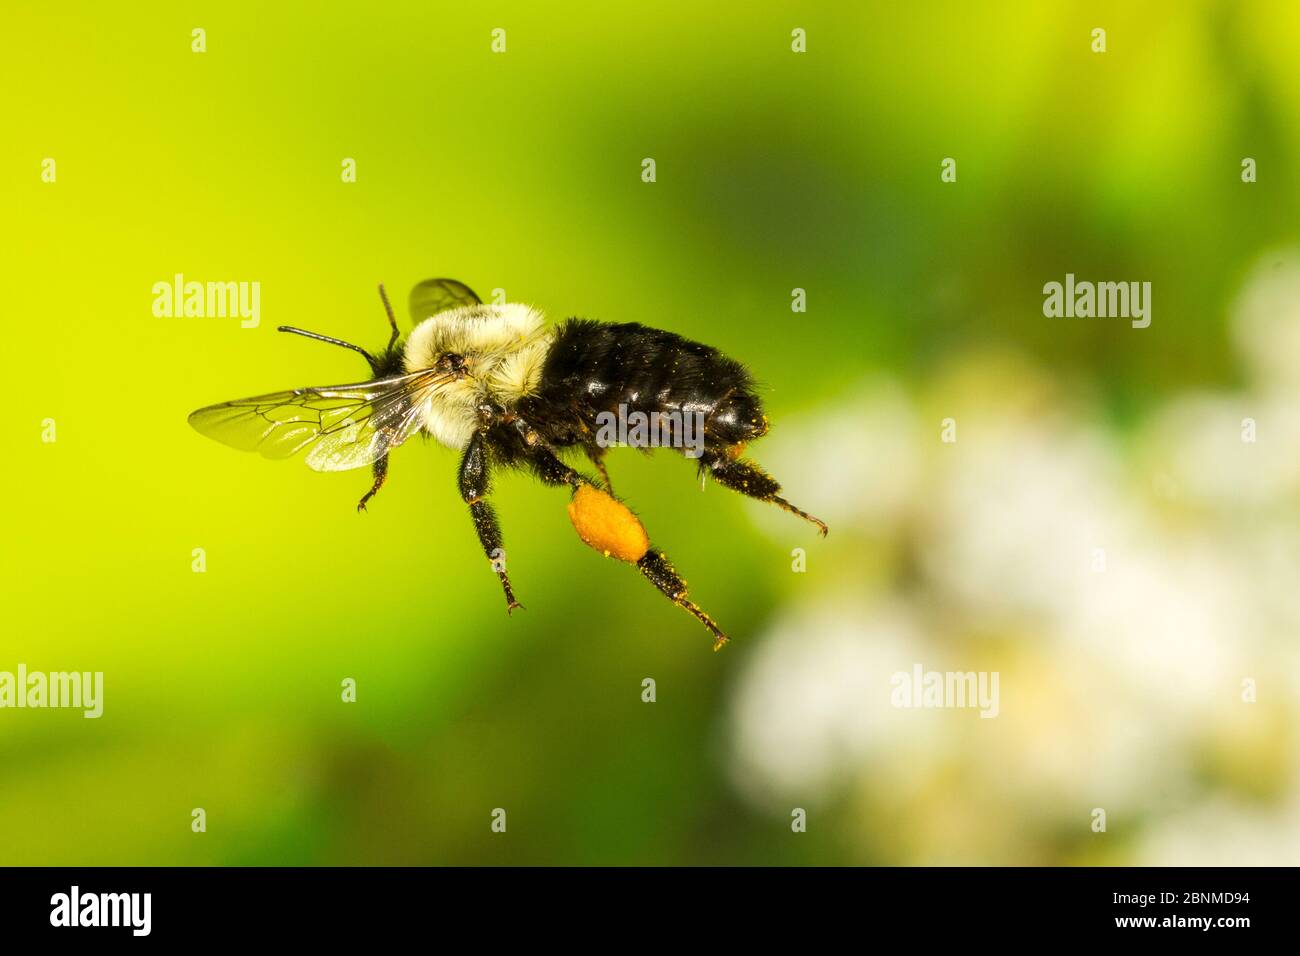 Common eastern bumble bee (Bombus impatiens) worker flying, Tuscaloosa County, Alabama, USA Controlled conditions. July Stock Photo